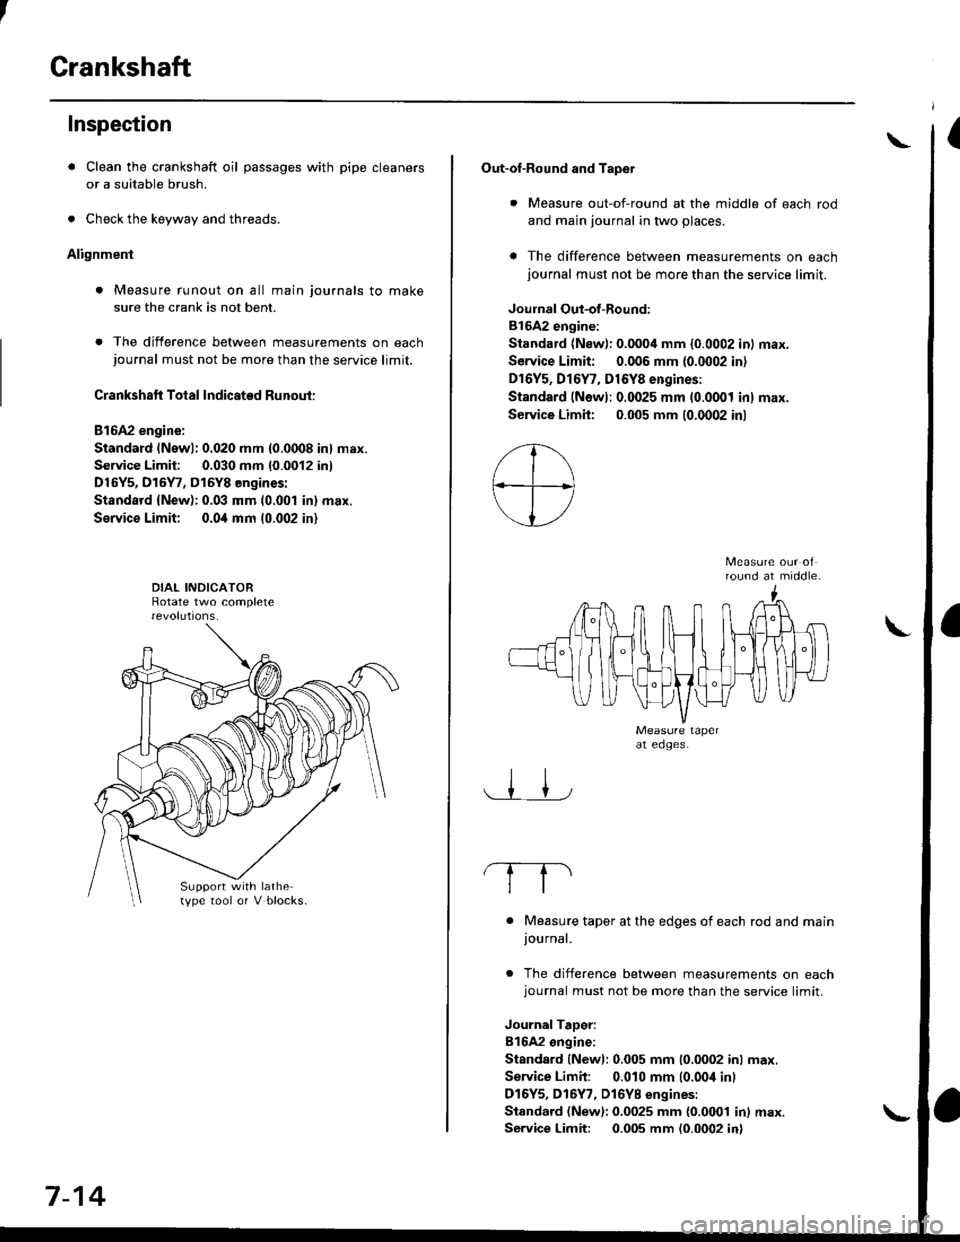 HONDA CIVIC 1996 6.G User Guide Crankshaft
Inspection
. Clean the crankshaft oil passages with pipe cleaners
or a suitable brush.
. Check the keyway and threads.
Alignment
. Measure runout on all main journals to make
sure the crank